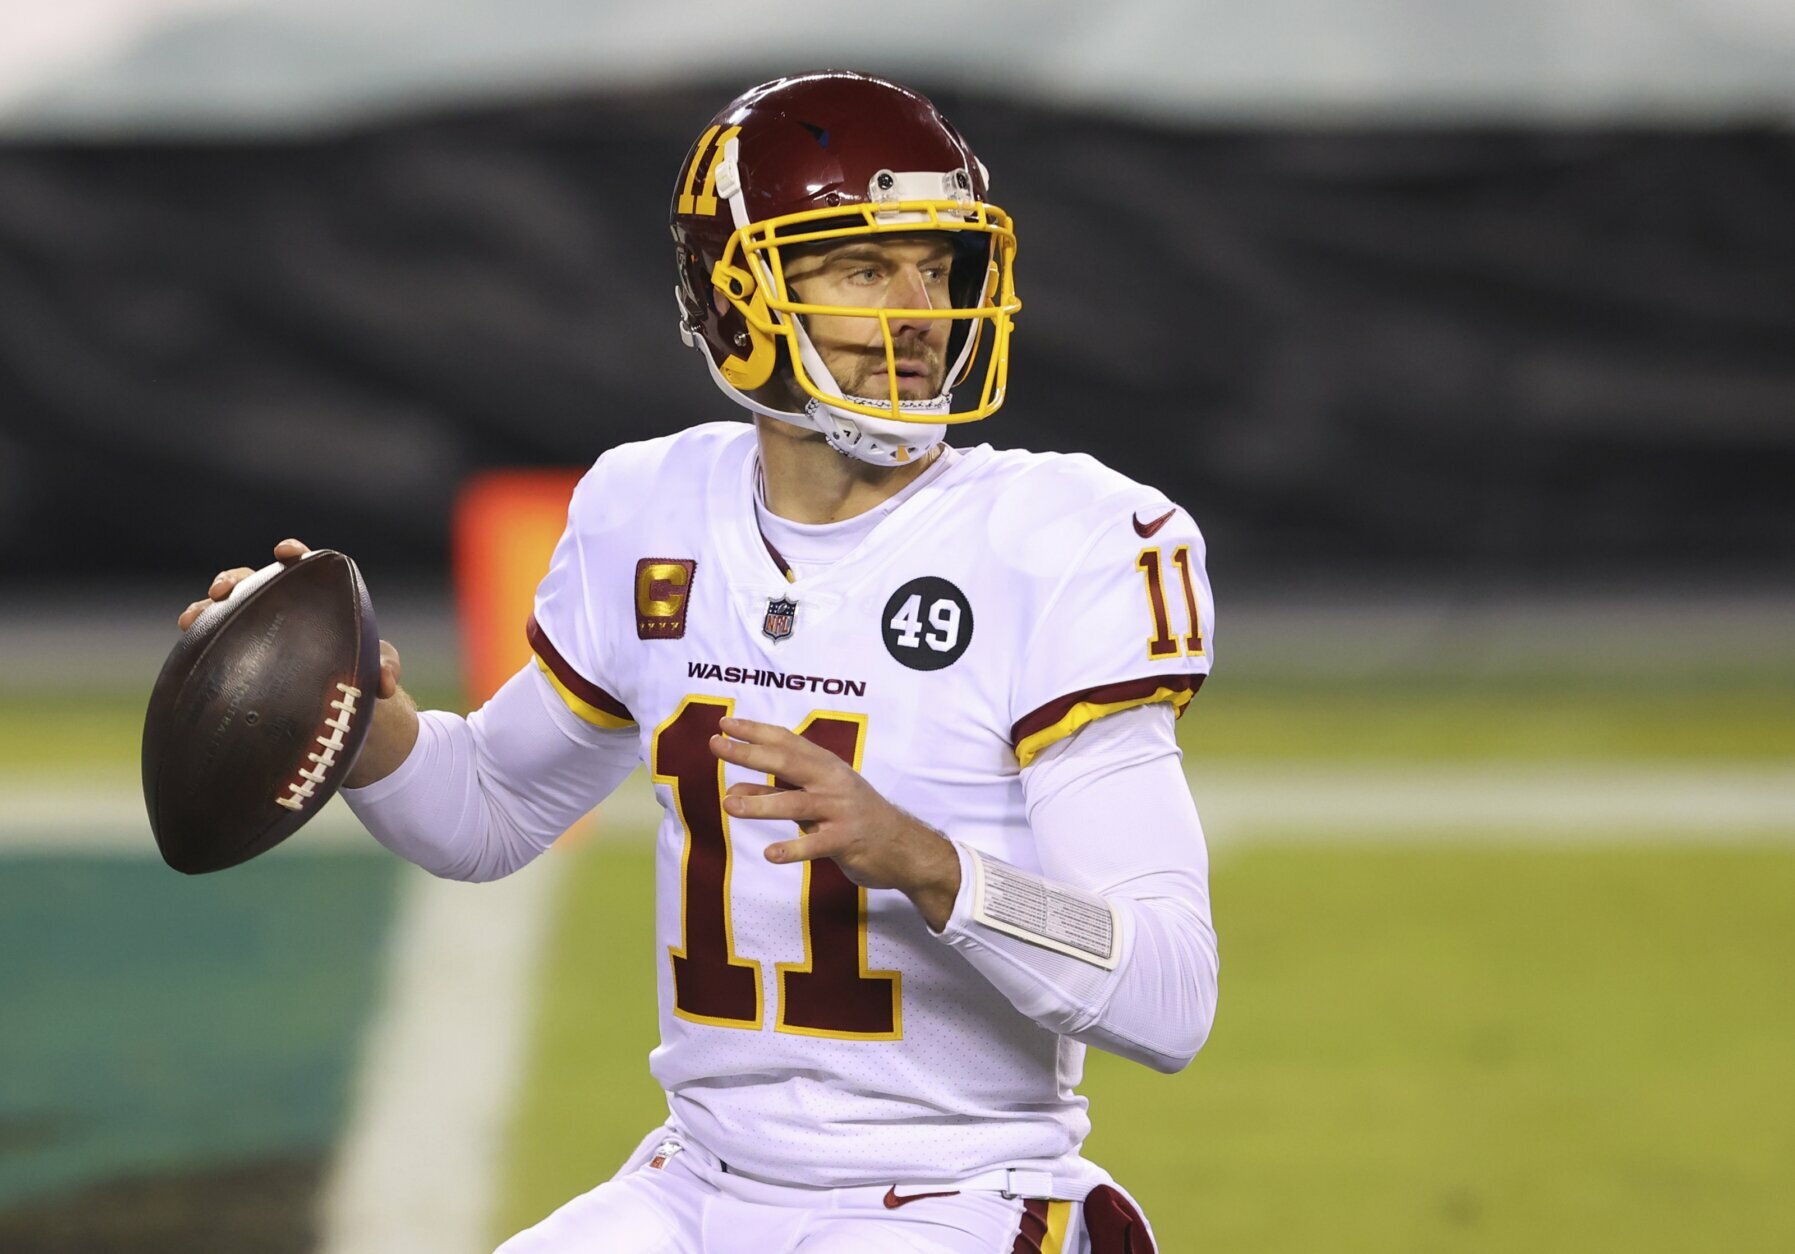 FILE - Washington Football Team quarterback Alex Smith (11) is shown in action against the Philadelphia Eagles during an NFL football game in Philadelphia, in this Sunday, Jan. 3, 2021, file photo. Smith announced his retirement Monday, April 19, 2021, on Instagram, saying he still has plenty of snaps left him just shy of his 37th birthday but is calling it quits to enjoy time with his family. (AP Photo/Rich Schultz, FIle)